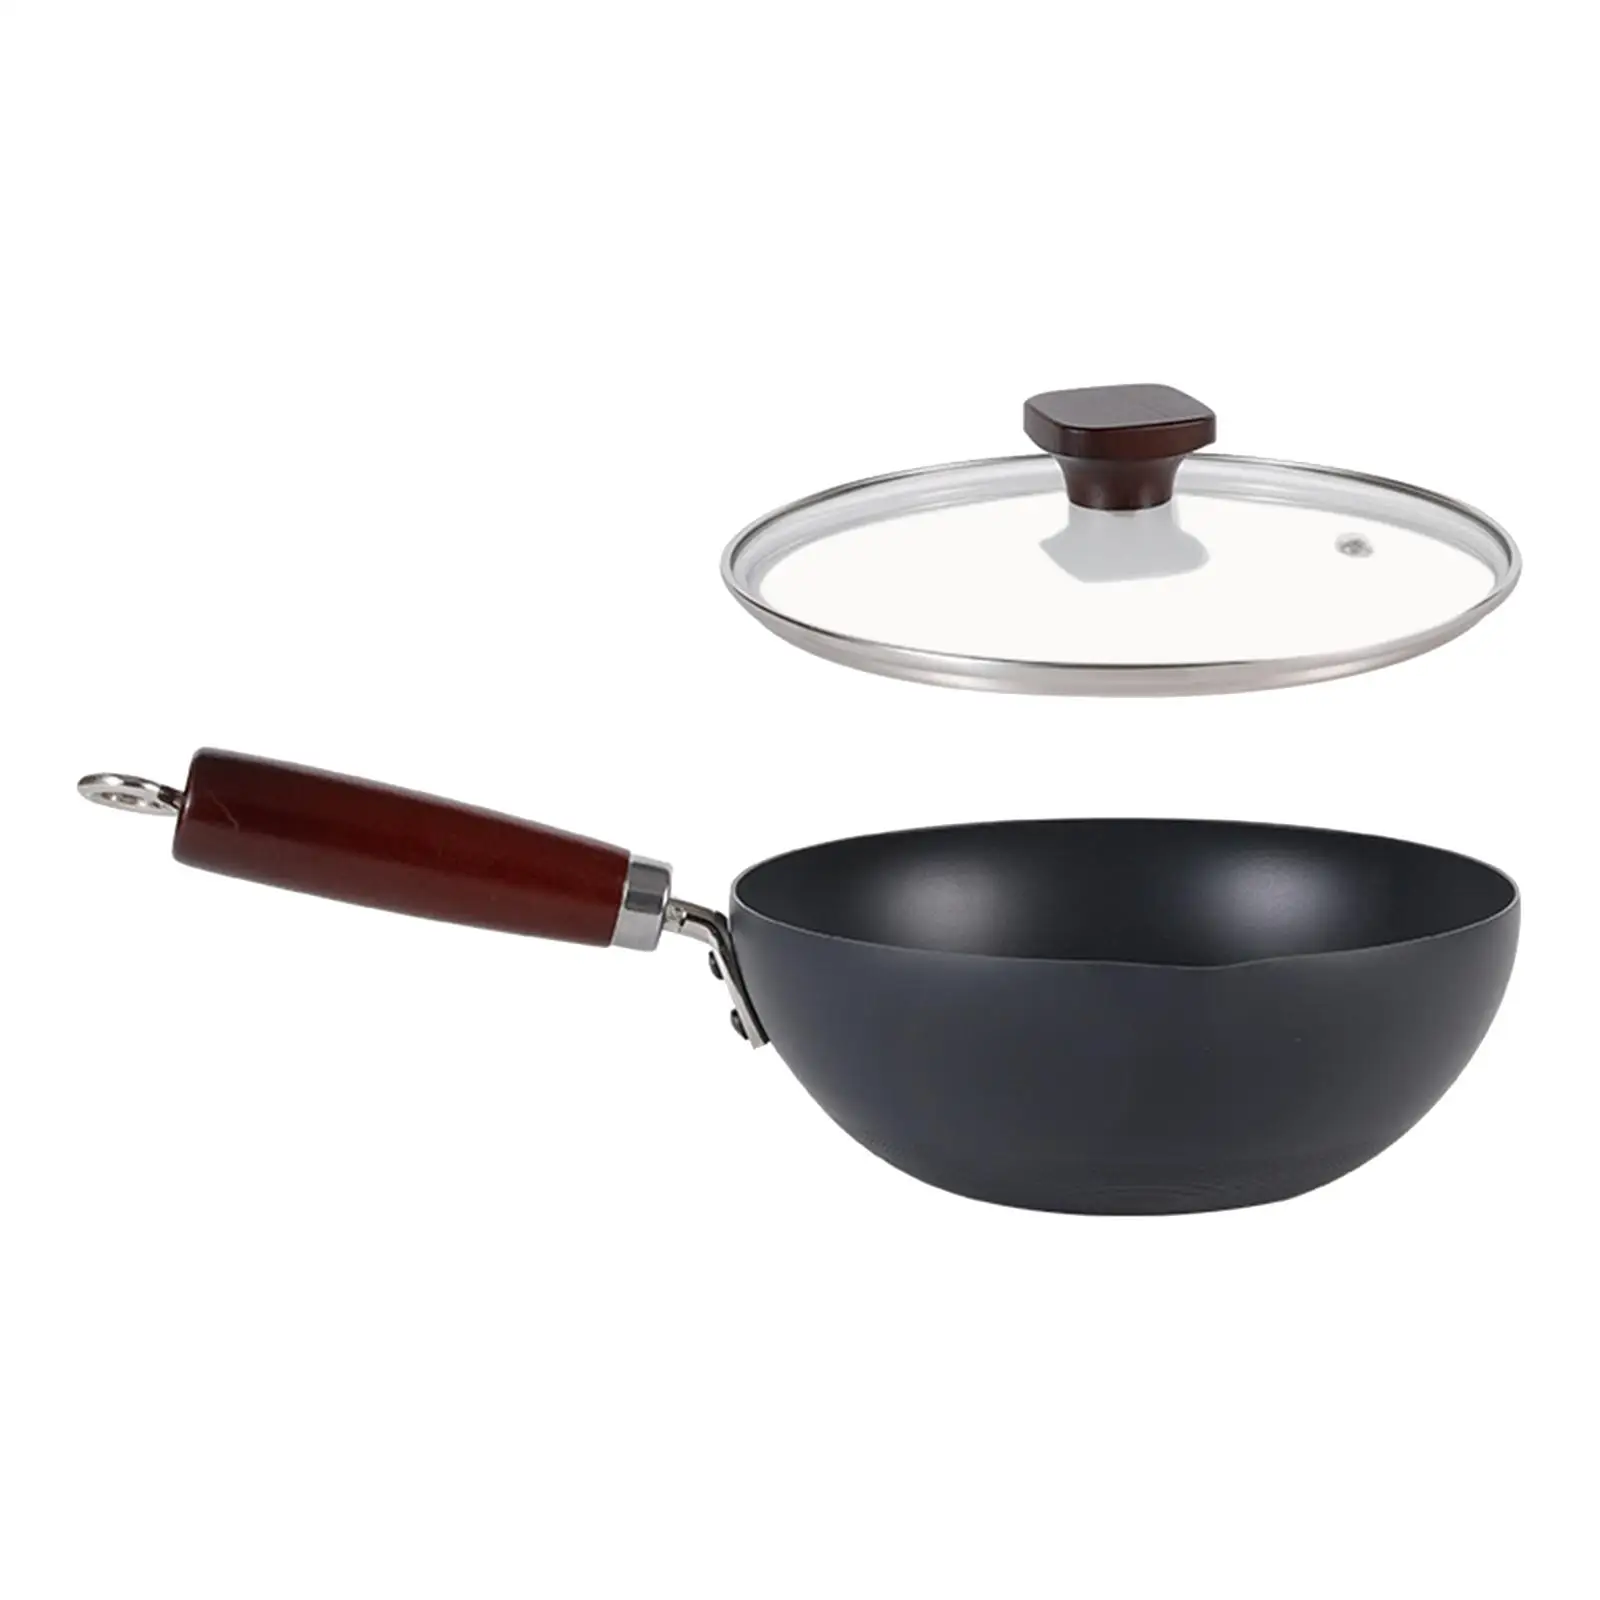 Wok Pan with Lid Household Homeuse Cooking Wok with Lid for Induction, Gas